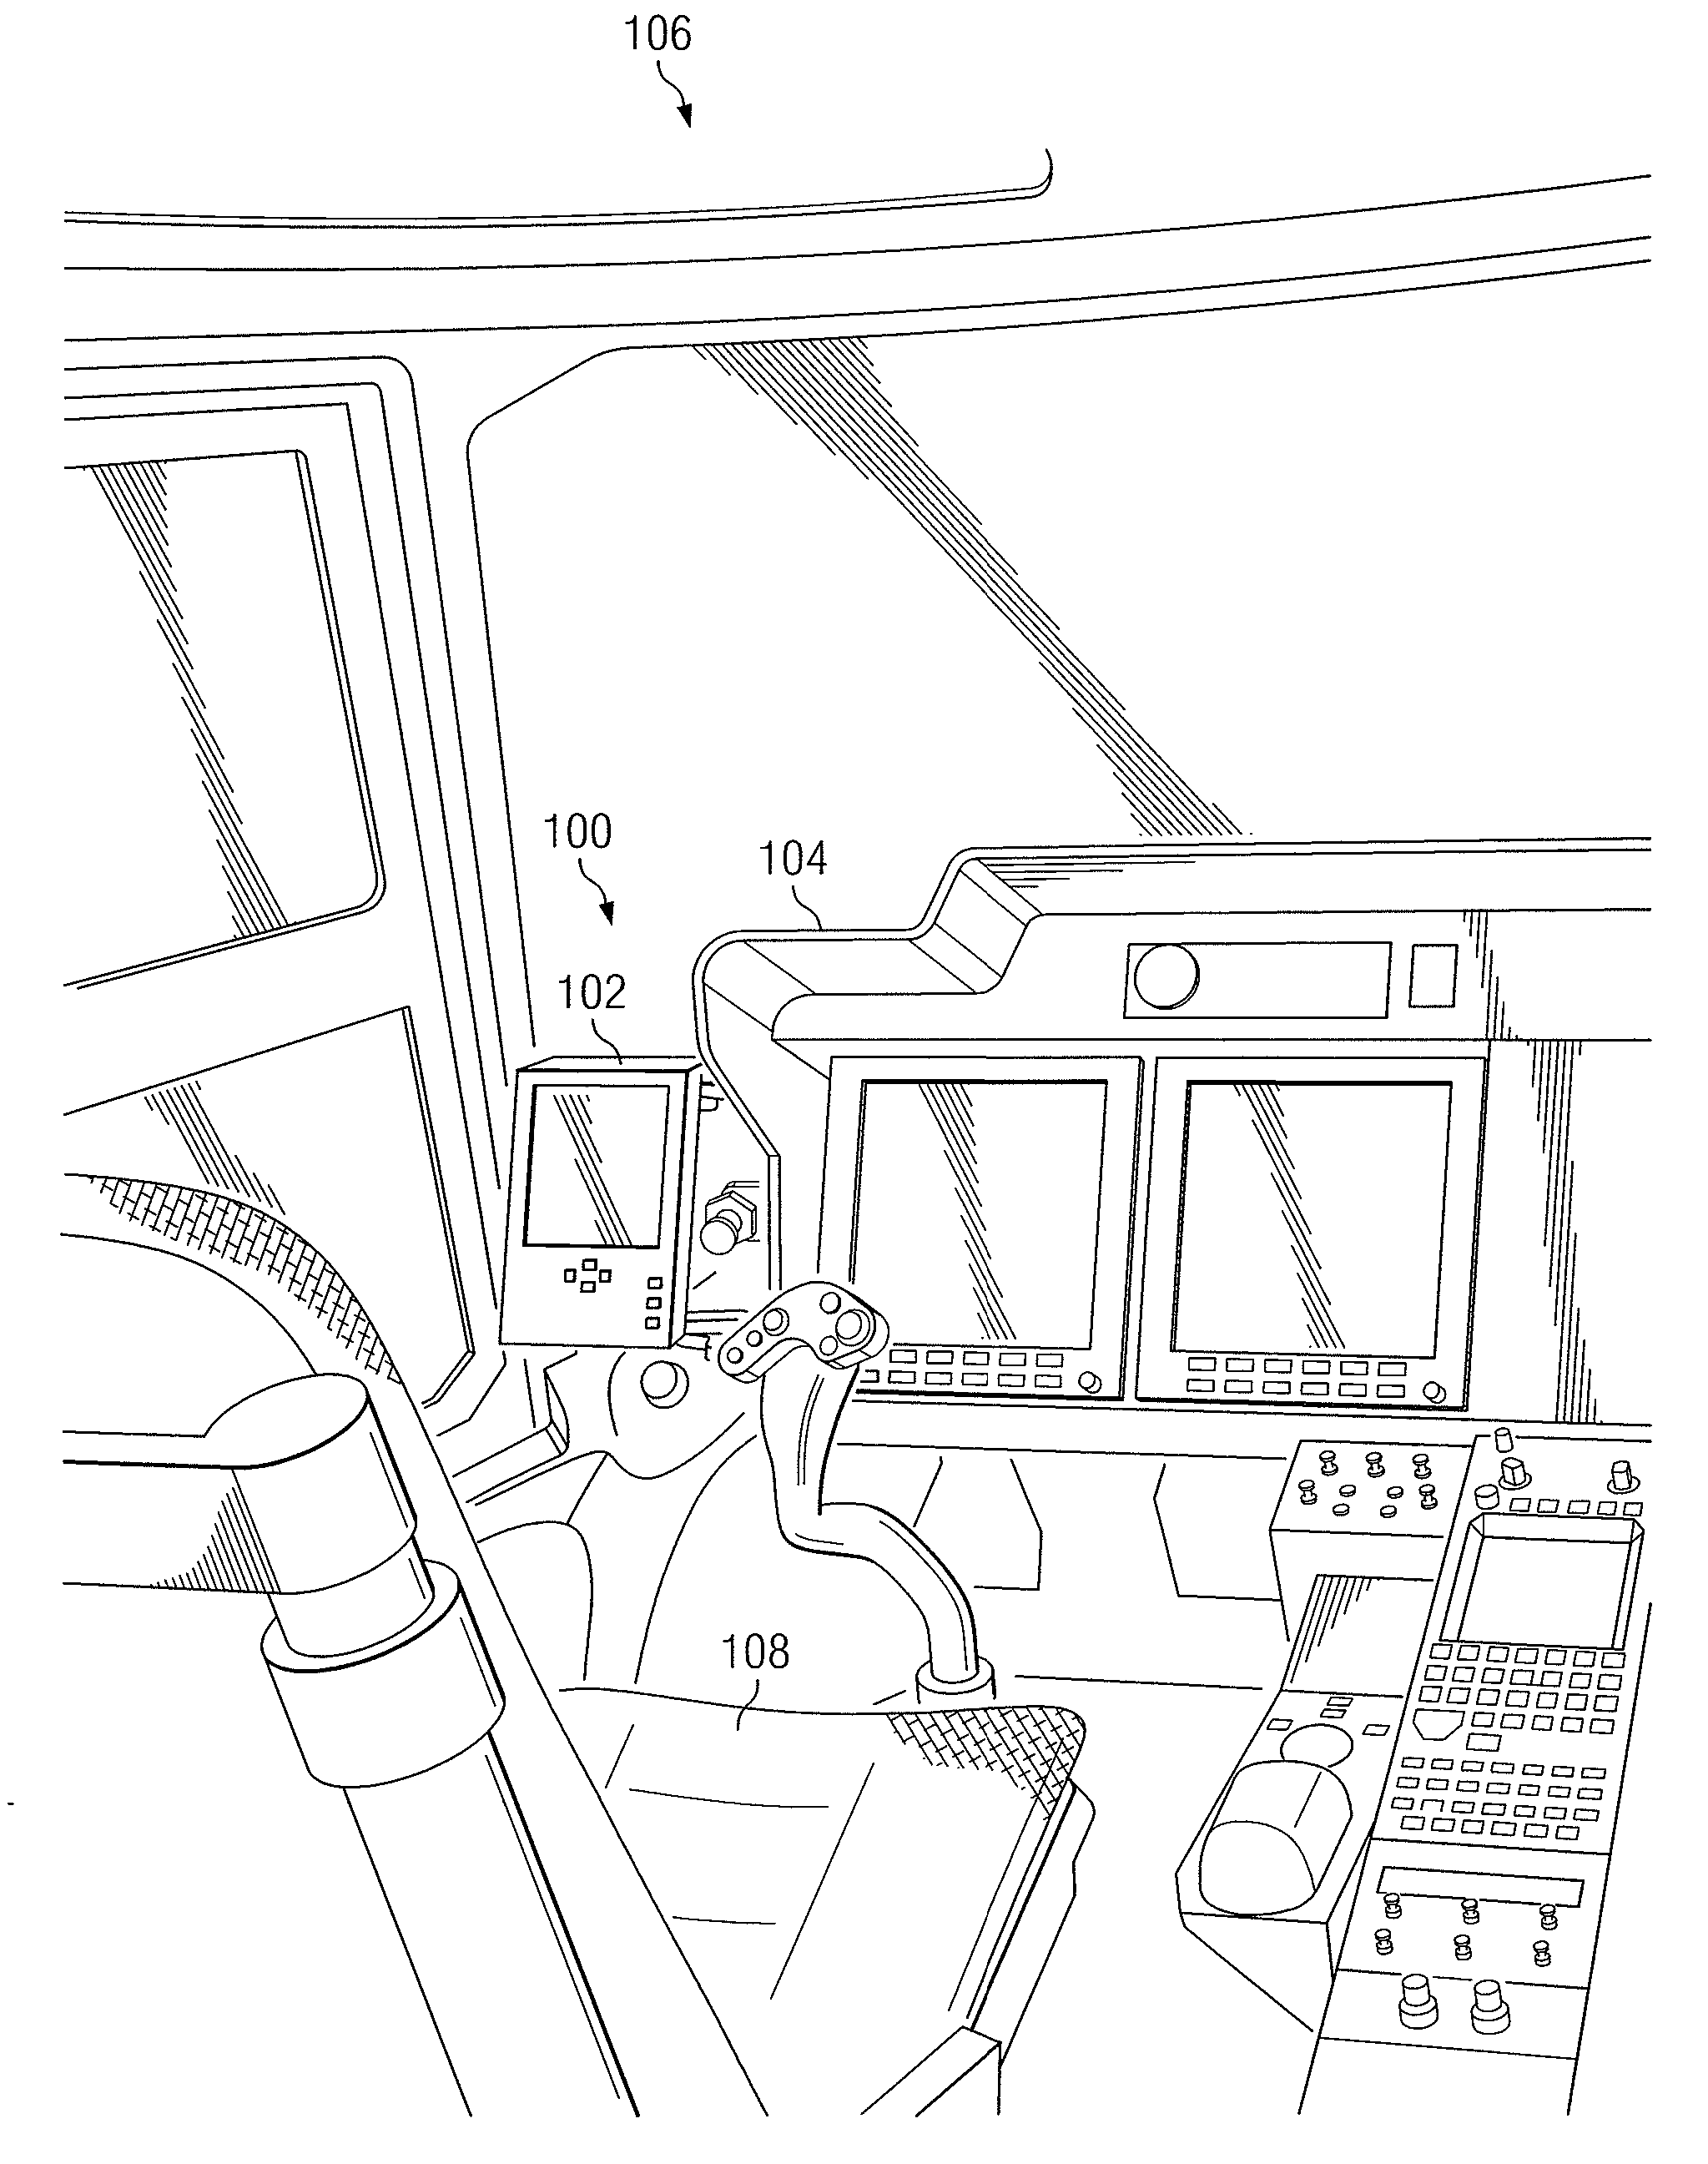 Universal mounting system for a handheld electronic device